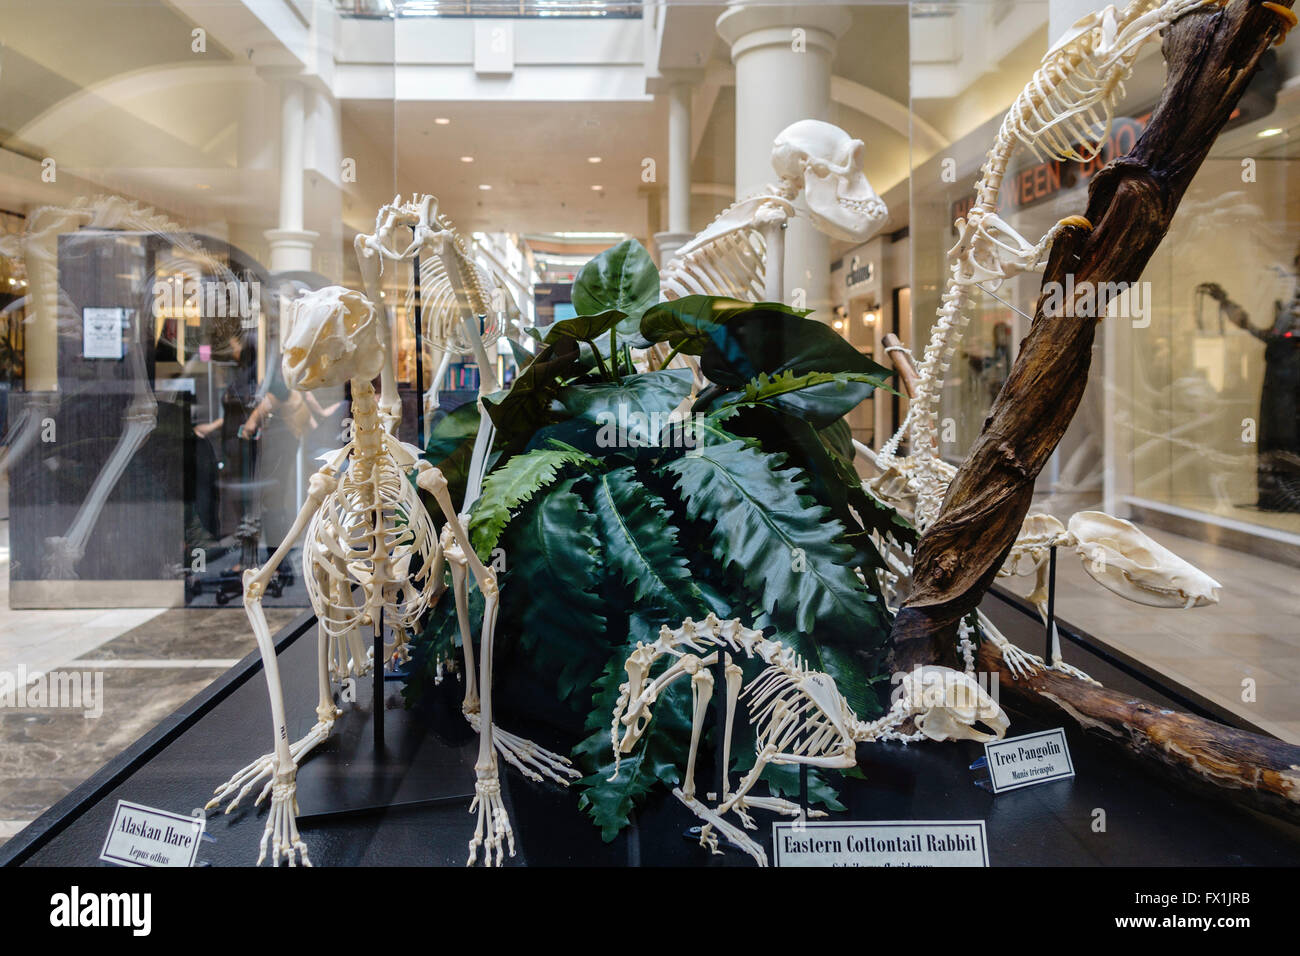 Man made fossils on display in a shopping mall in Oklahoma City, Oklahoma, USA. Stock Photo